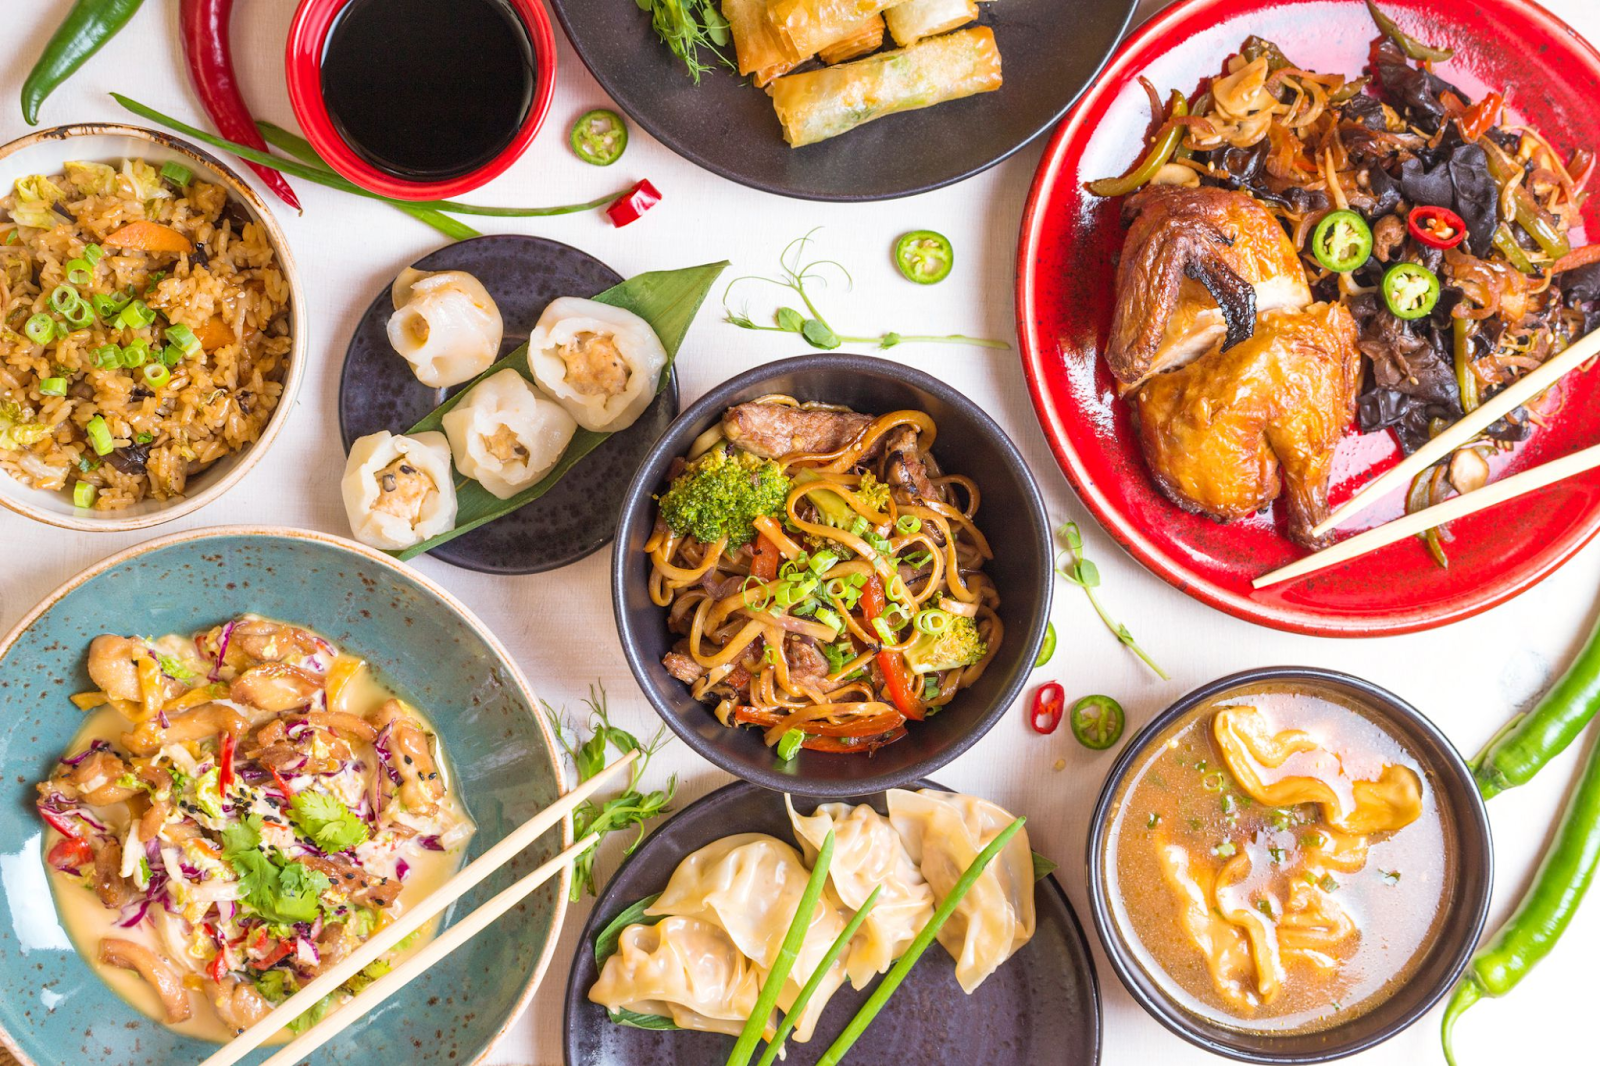 Chinese Cuisine A Flavorful World of News and Trends